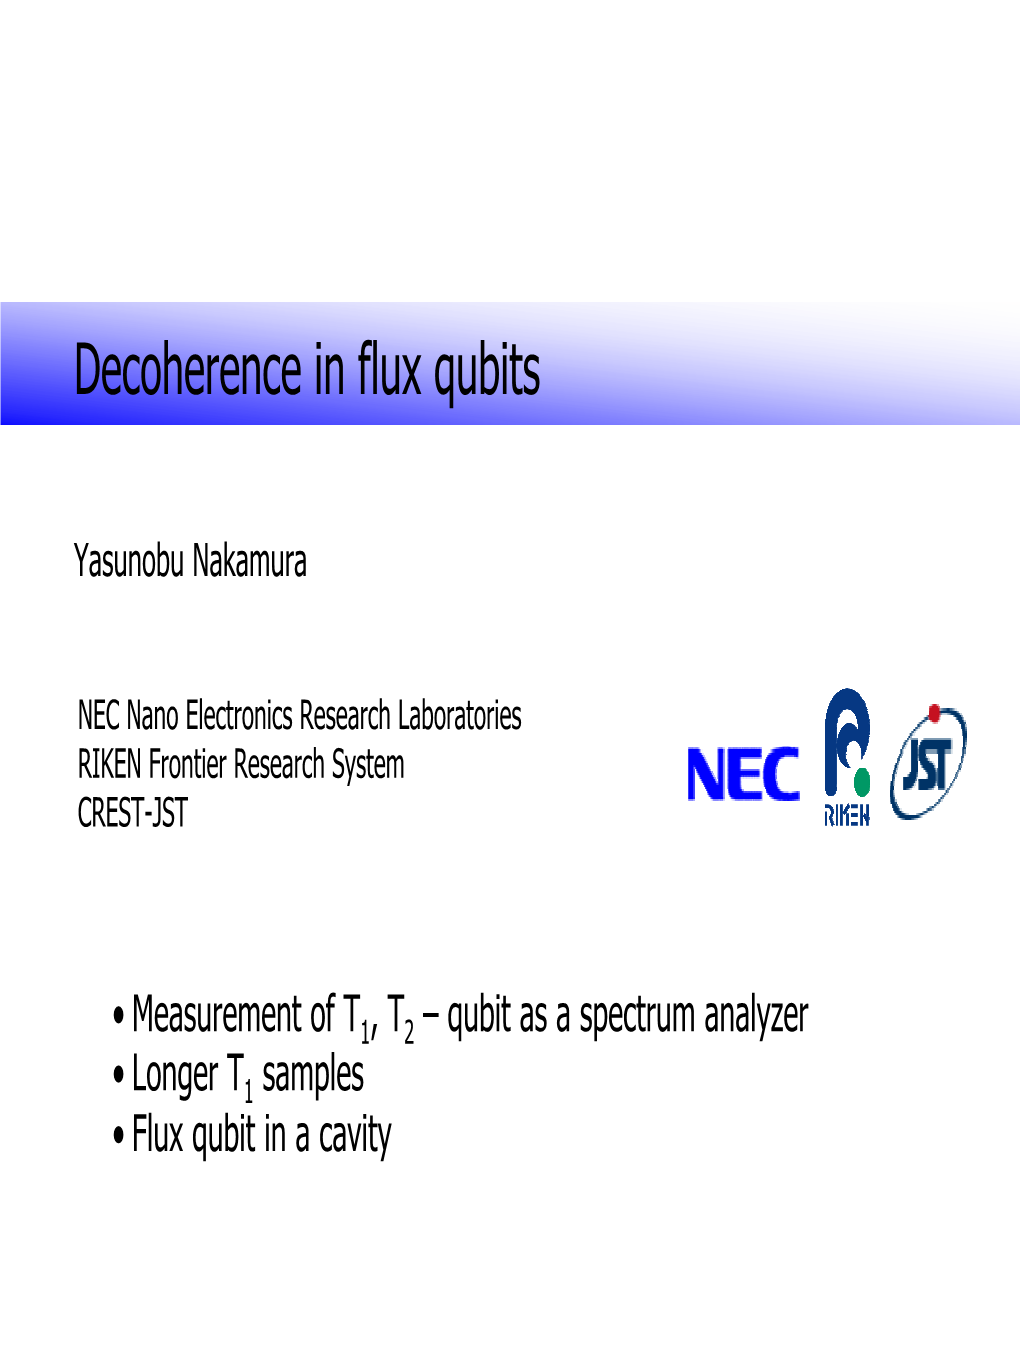 Decoherence in Flux Qubits